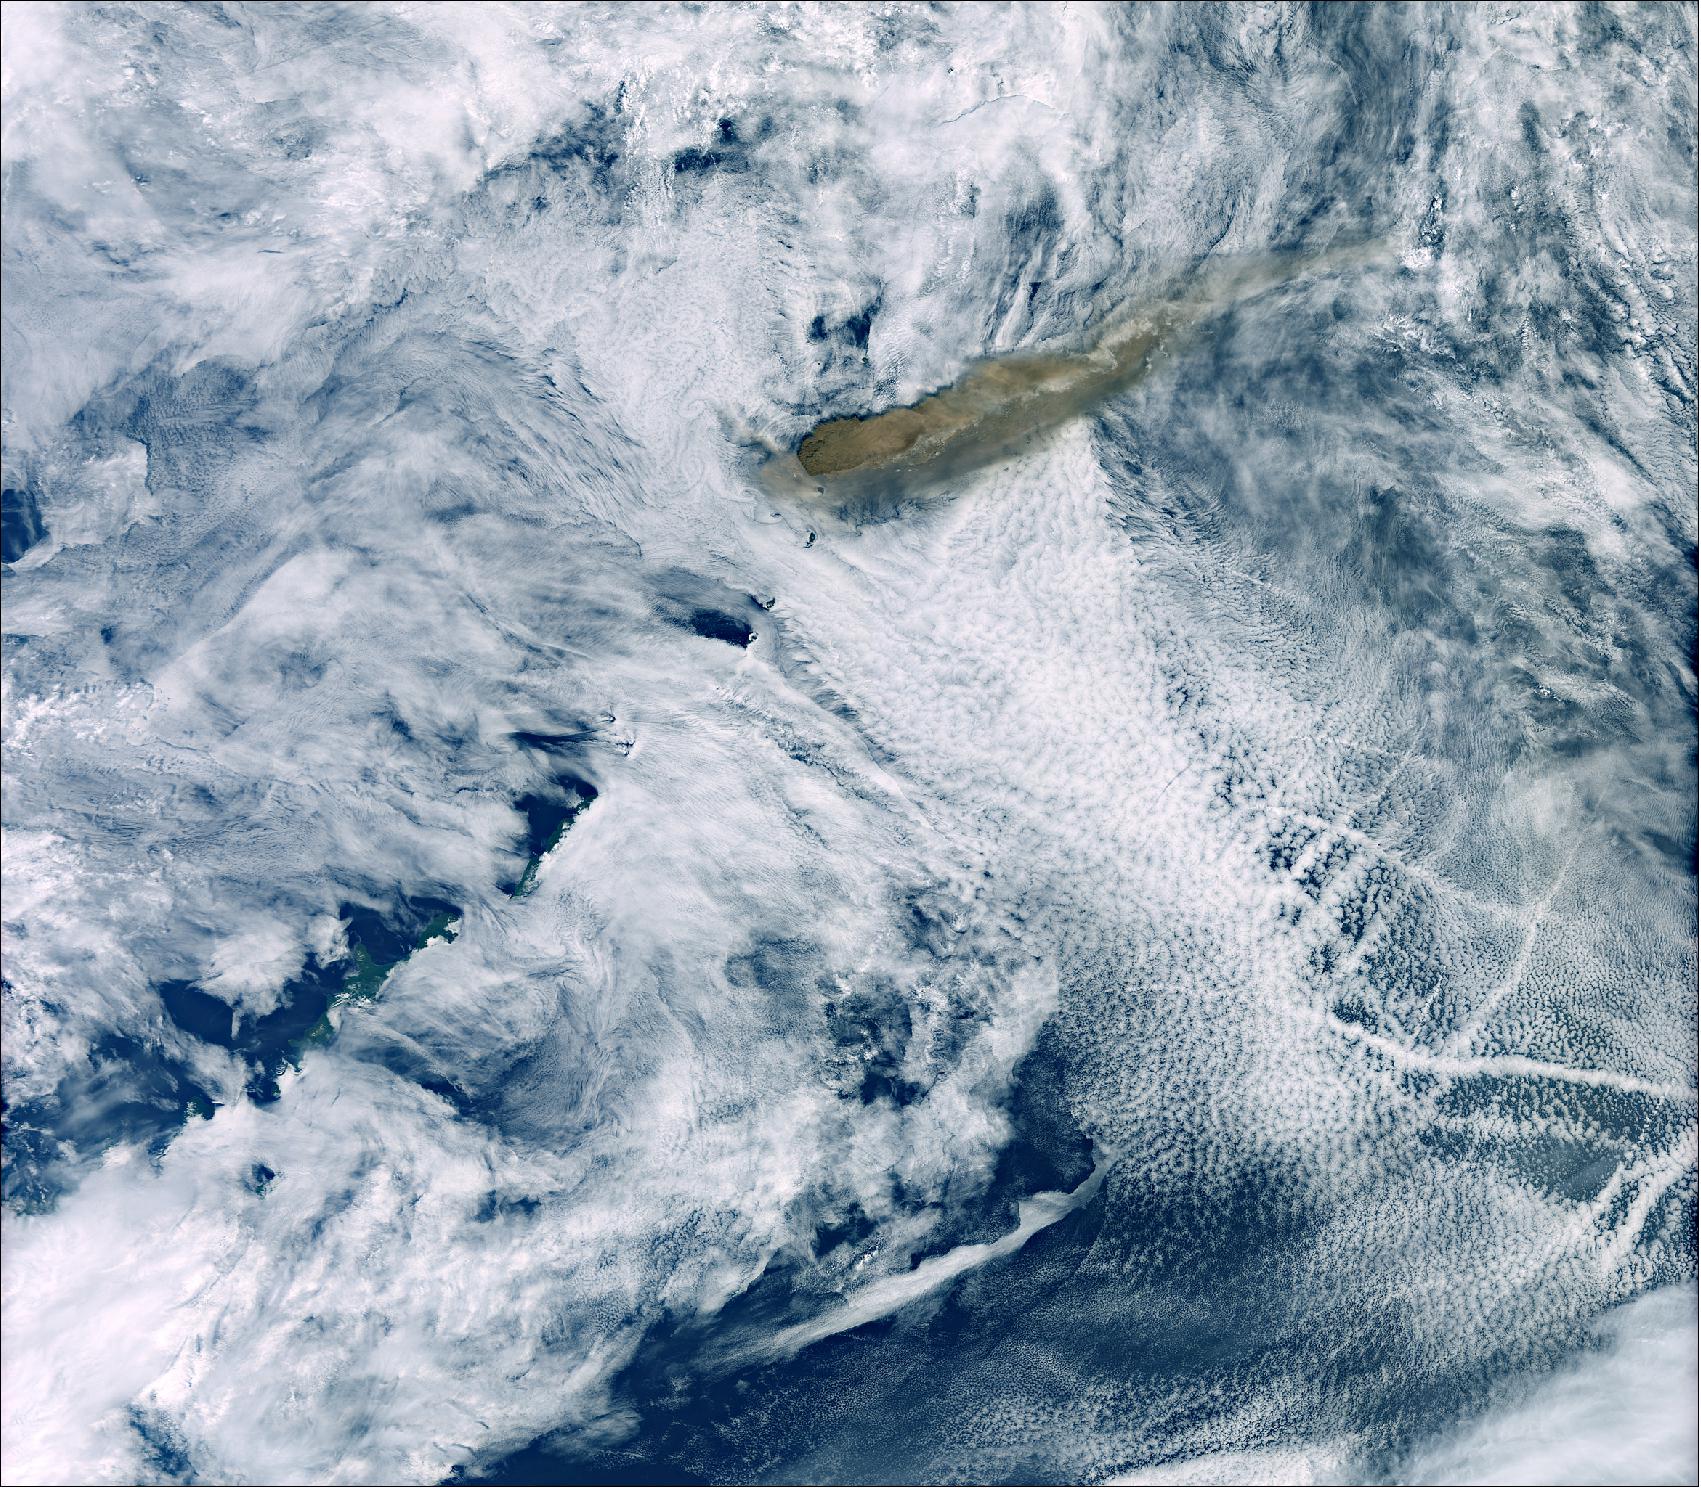 Figure 14: This image, which was captured on 22 June, shows the brown ash plumes rising high above the dense clouds – drifting eastwards over the North Pacific Ocean (image credit: ESA, the image contains modified Copernicus Sentinel data (2019), processed by ESA, CC BY-SA 3.0 IGO)